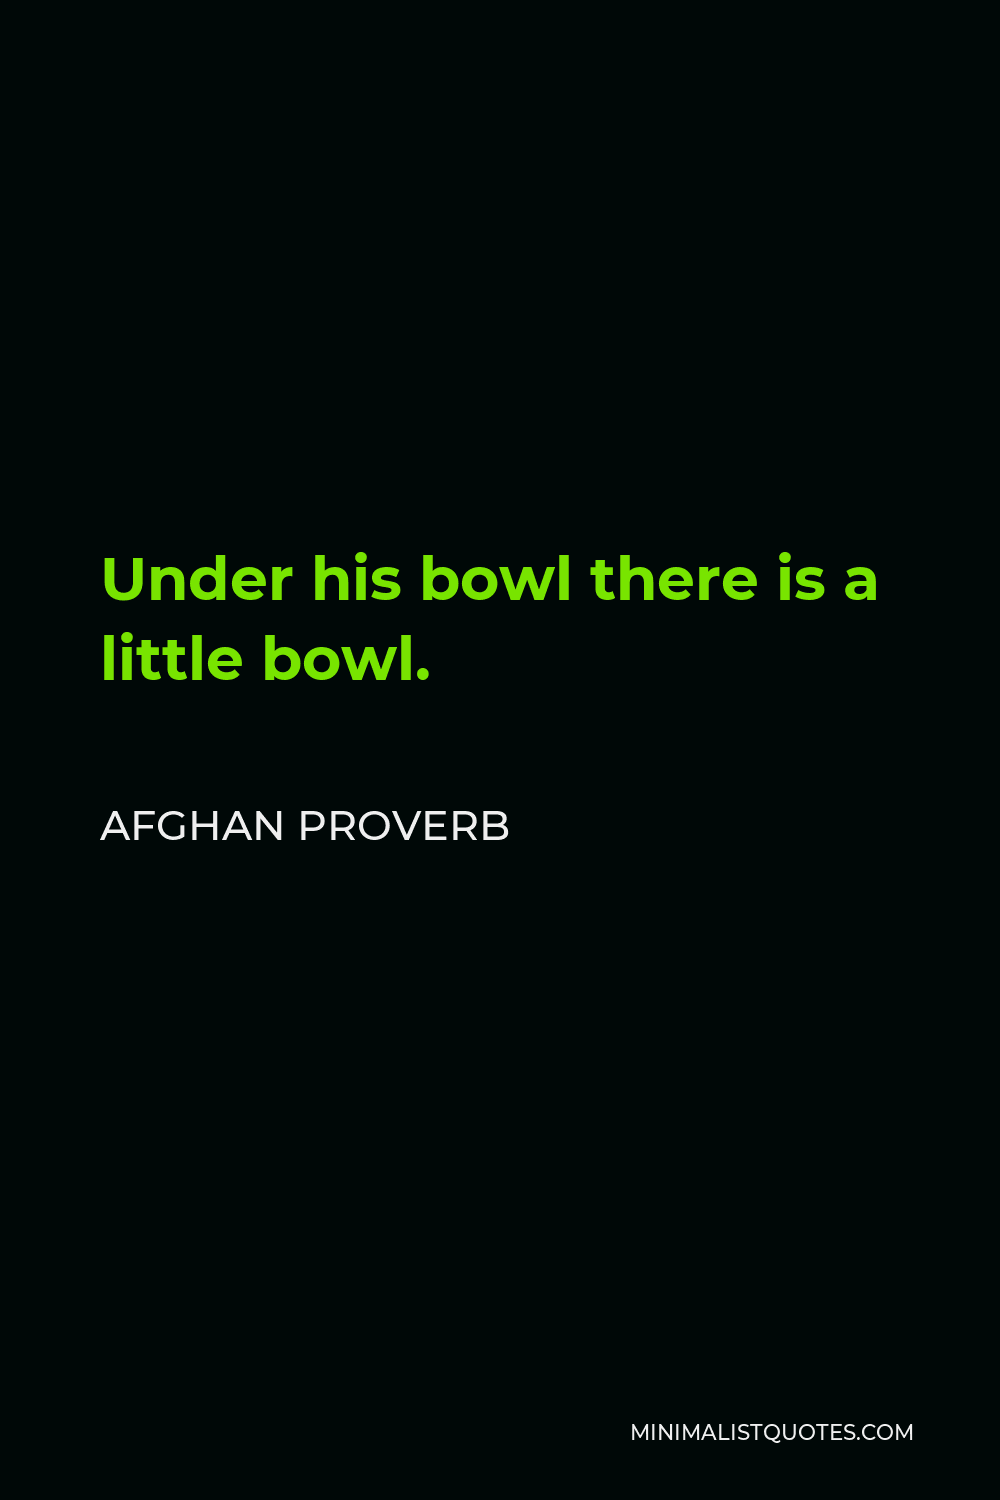 Afghan Proverb Quote - Under his bowl there is a little bowl.